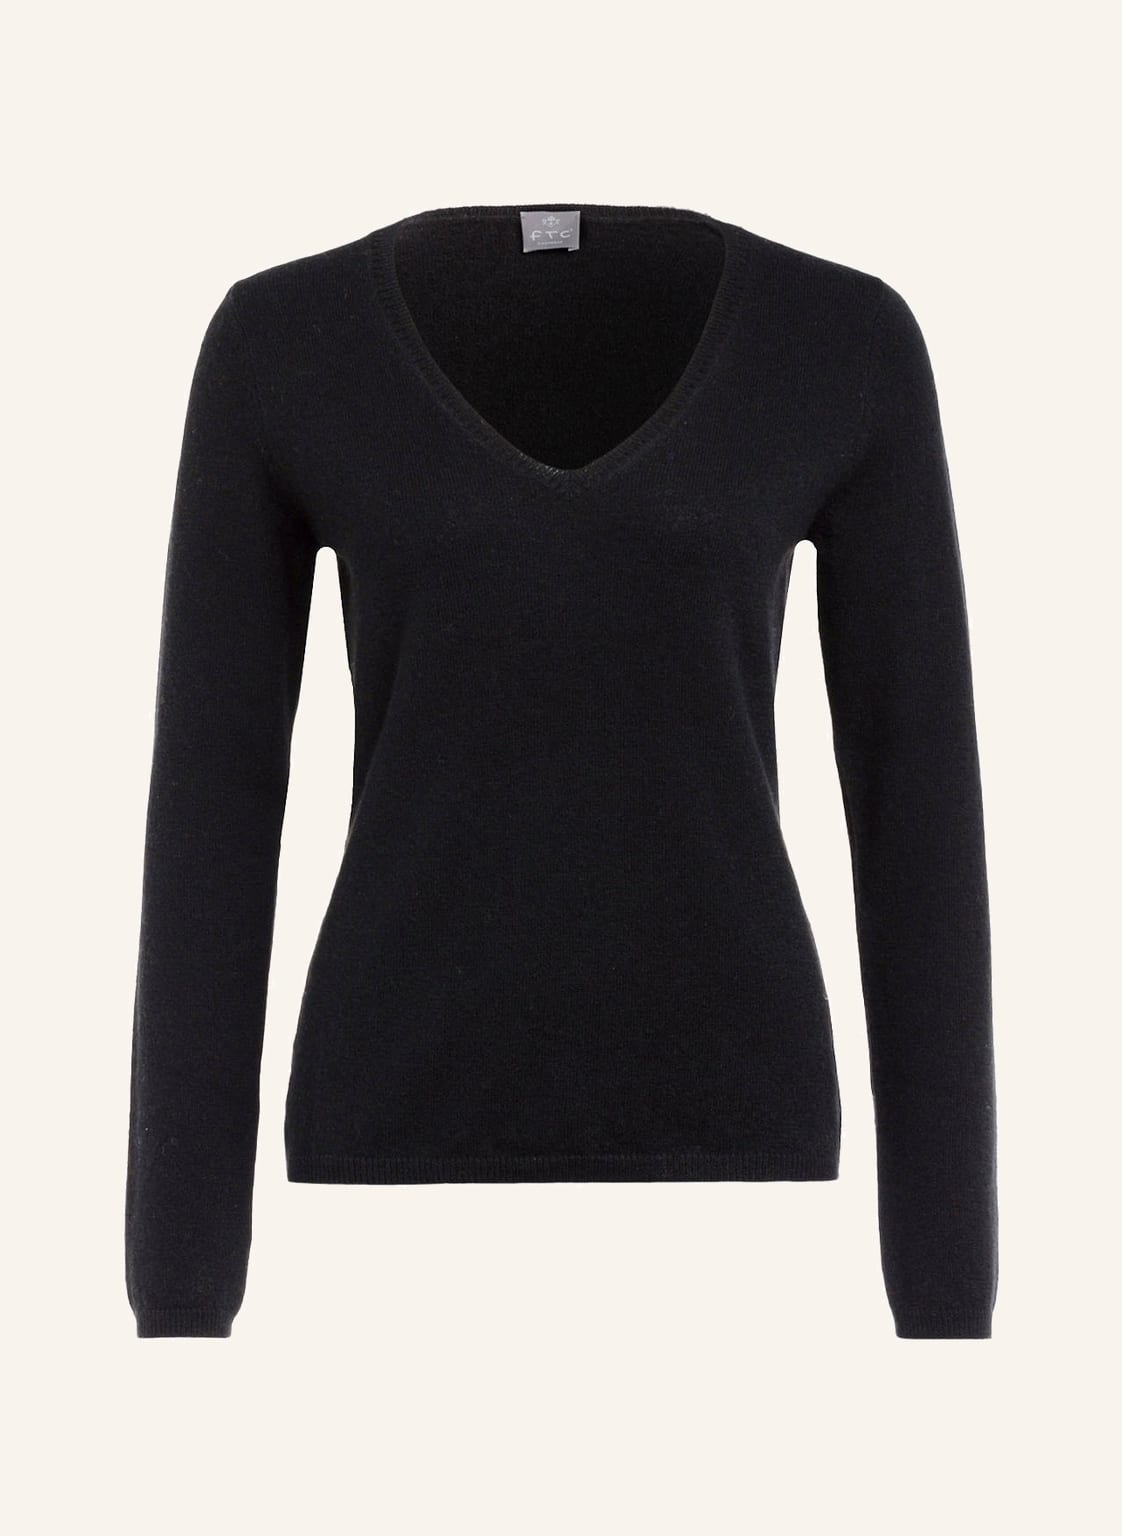 Image of Ftc Cashmere Cashmere-Pullover schwarz